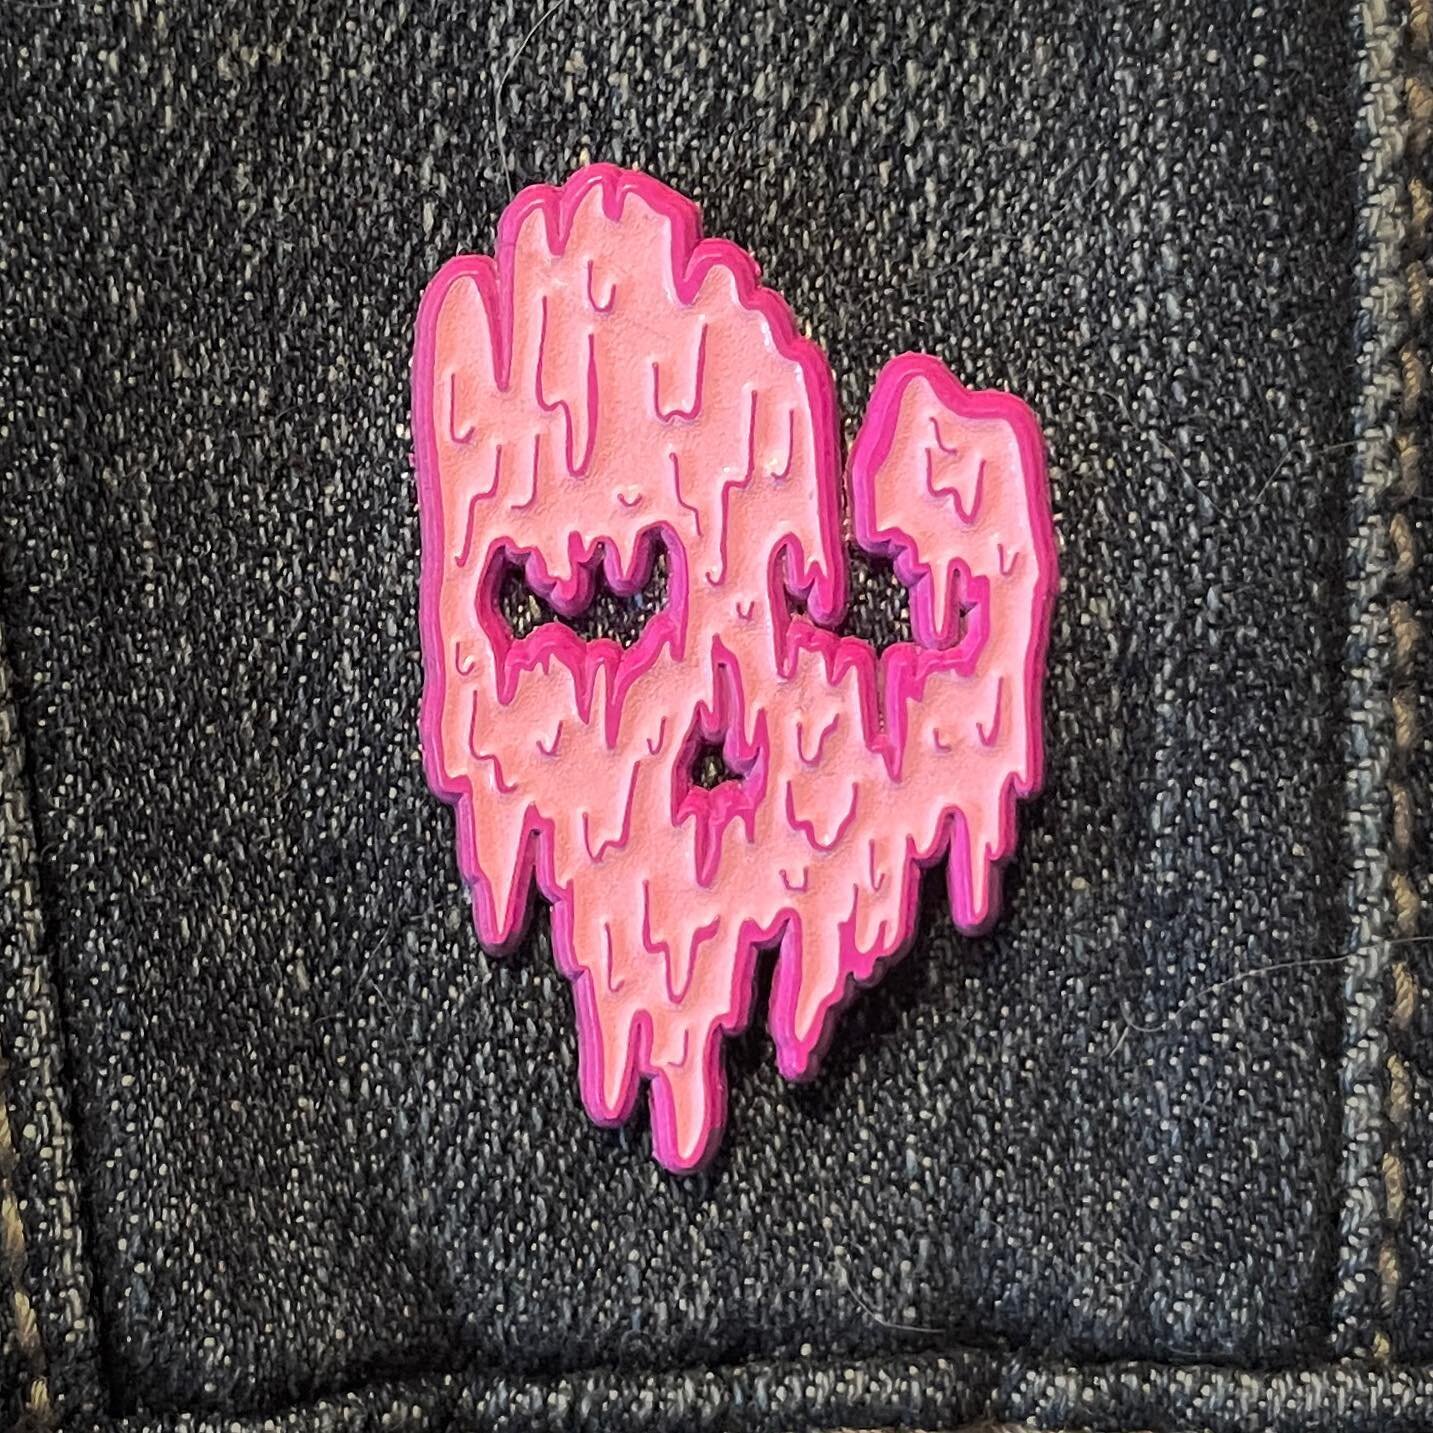 Another new pin?! Before the holidays?! Check out my new Pink edition Slime Skull!  It glows in the dark, just like the green version!  And done forget, this Thursday, 12/16, is the LAST DAY to place orders in time for delivery by Christmas! 
.
.

#d